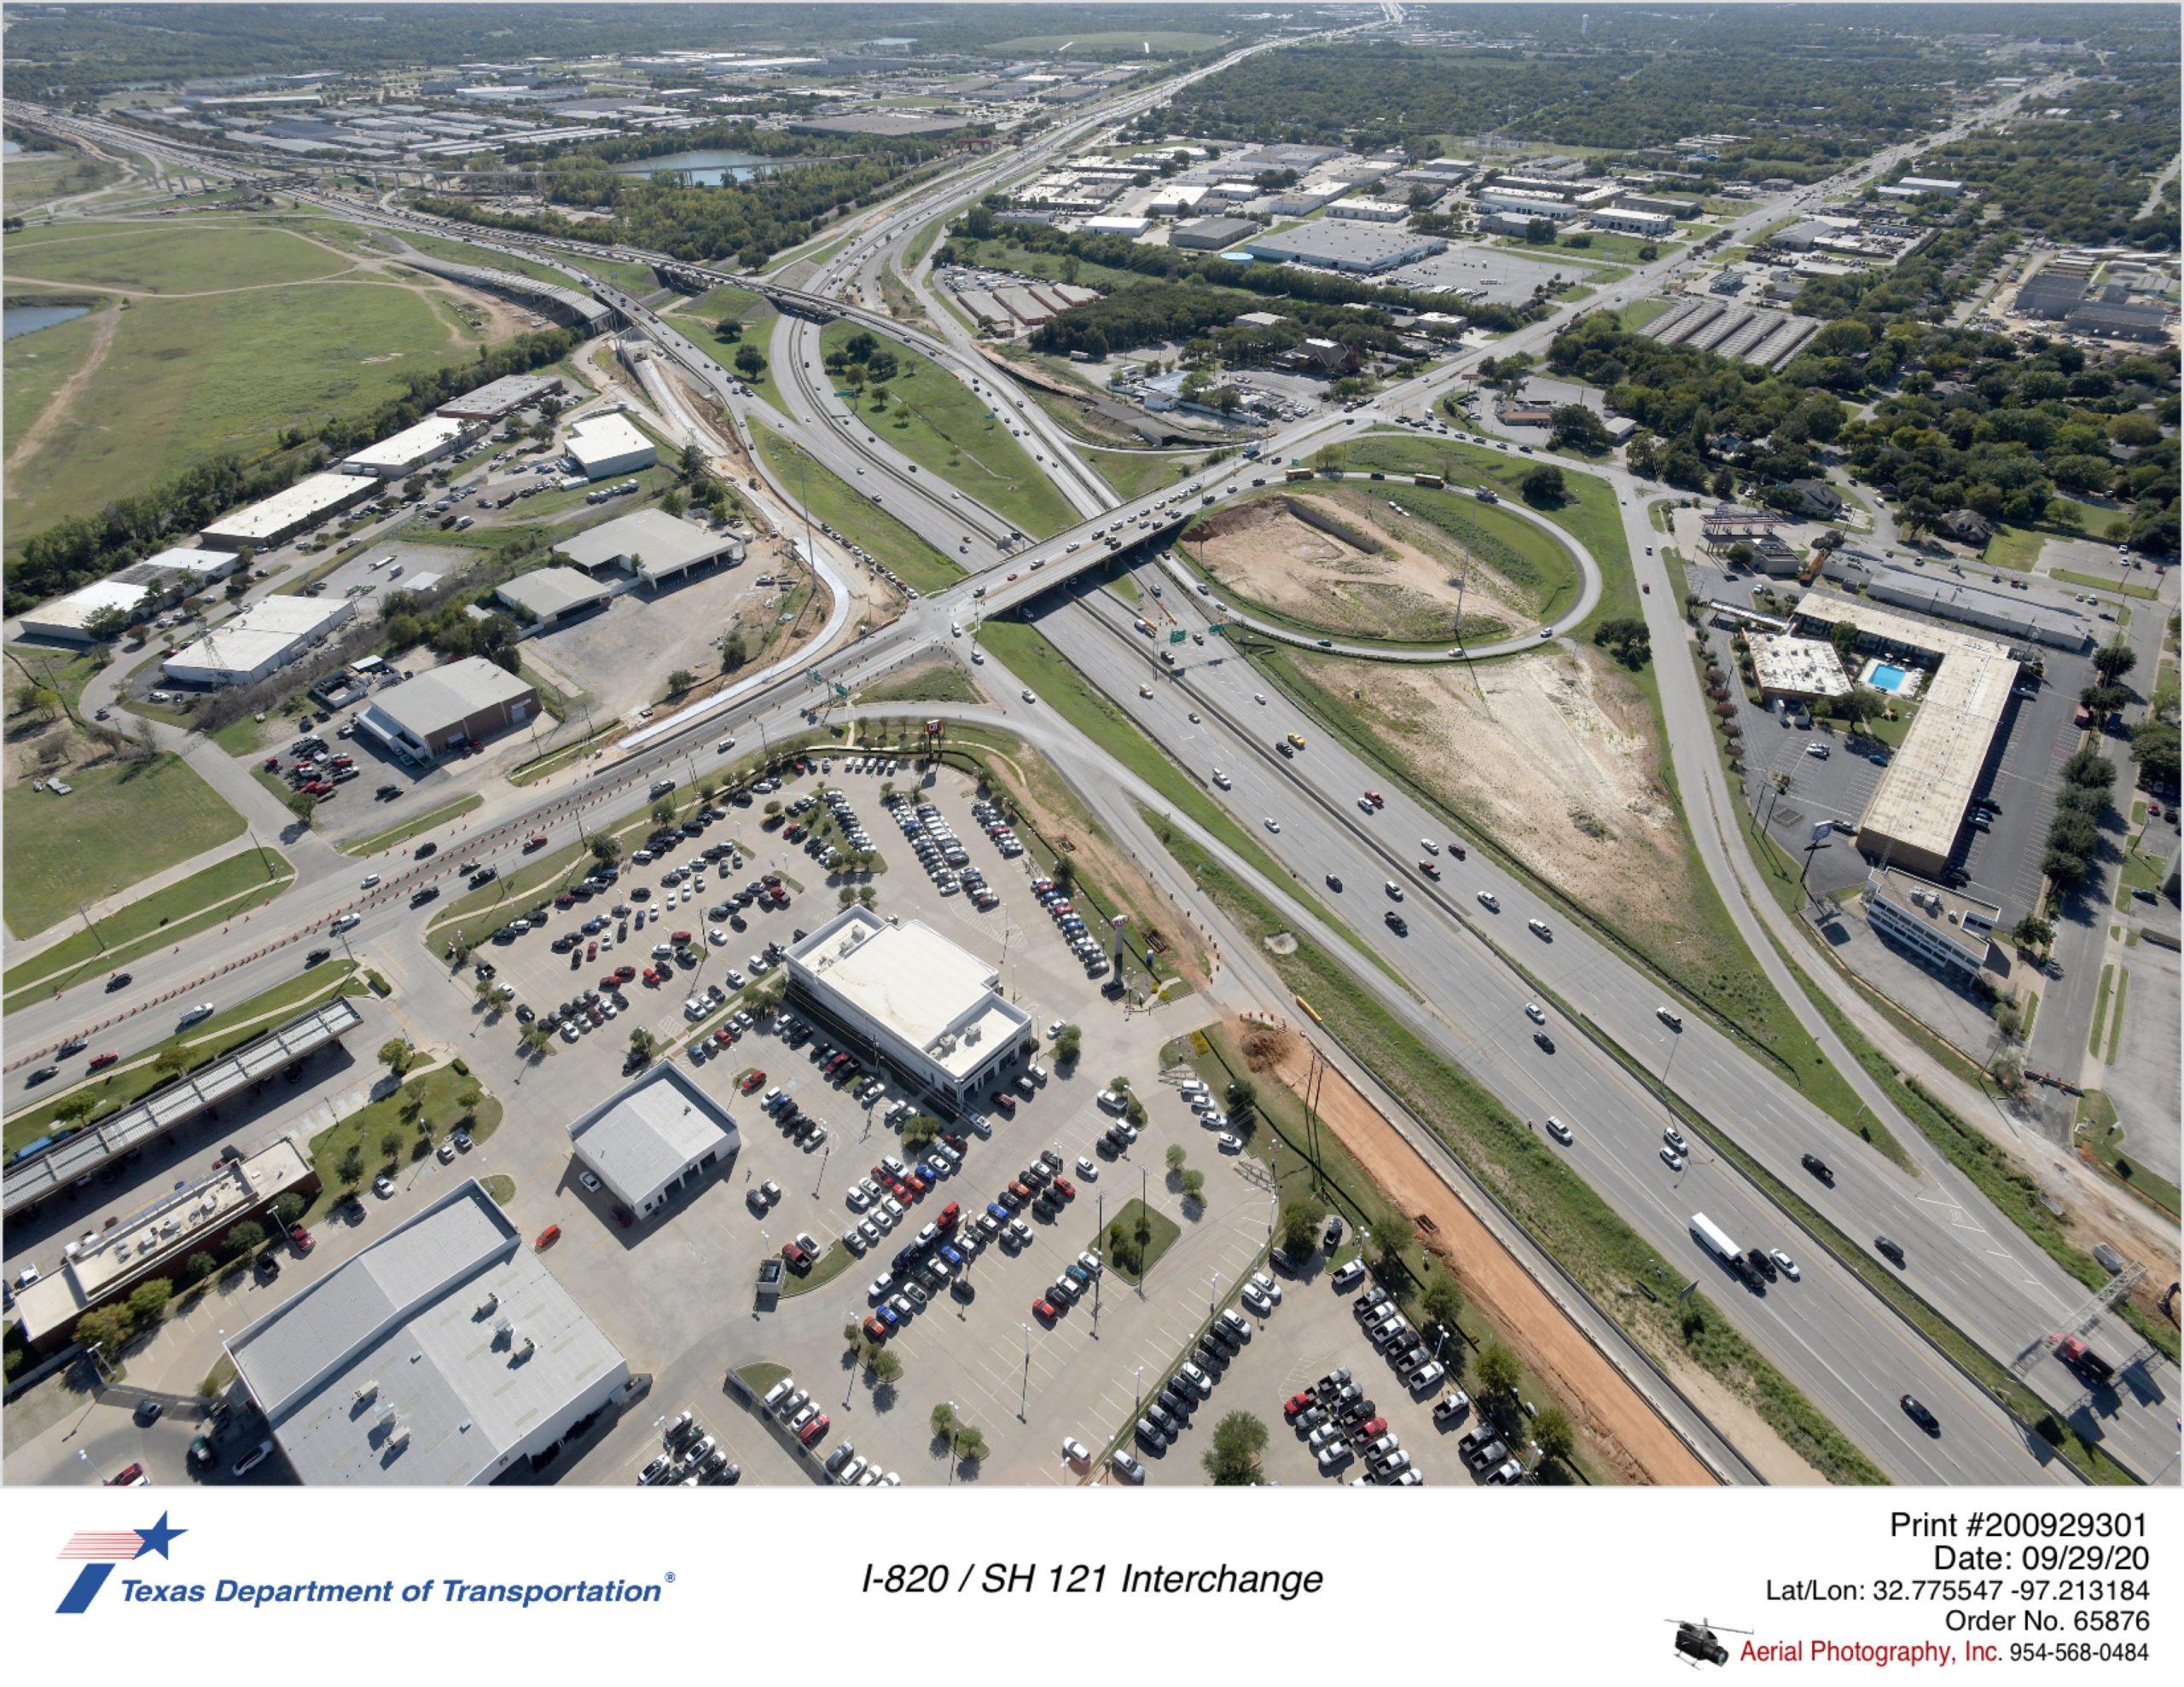 I-820/SH 121 interchange looking southwest. Construction of new northbound frontage road from SH 121 to I-820 is shown.